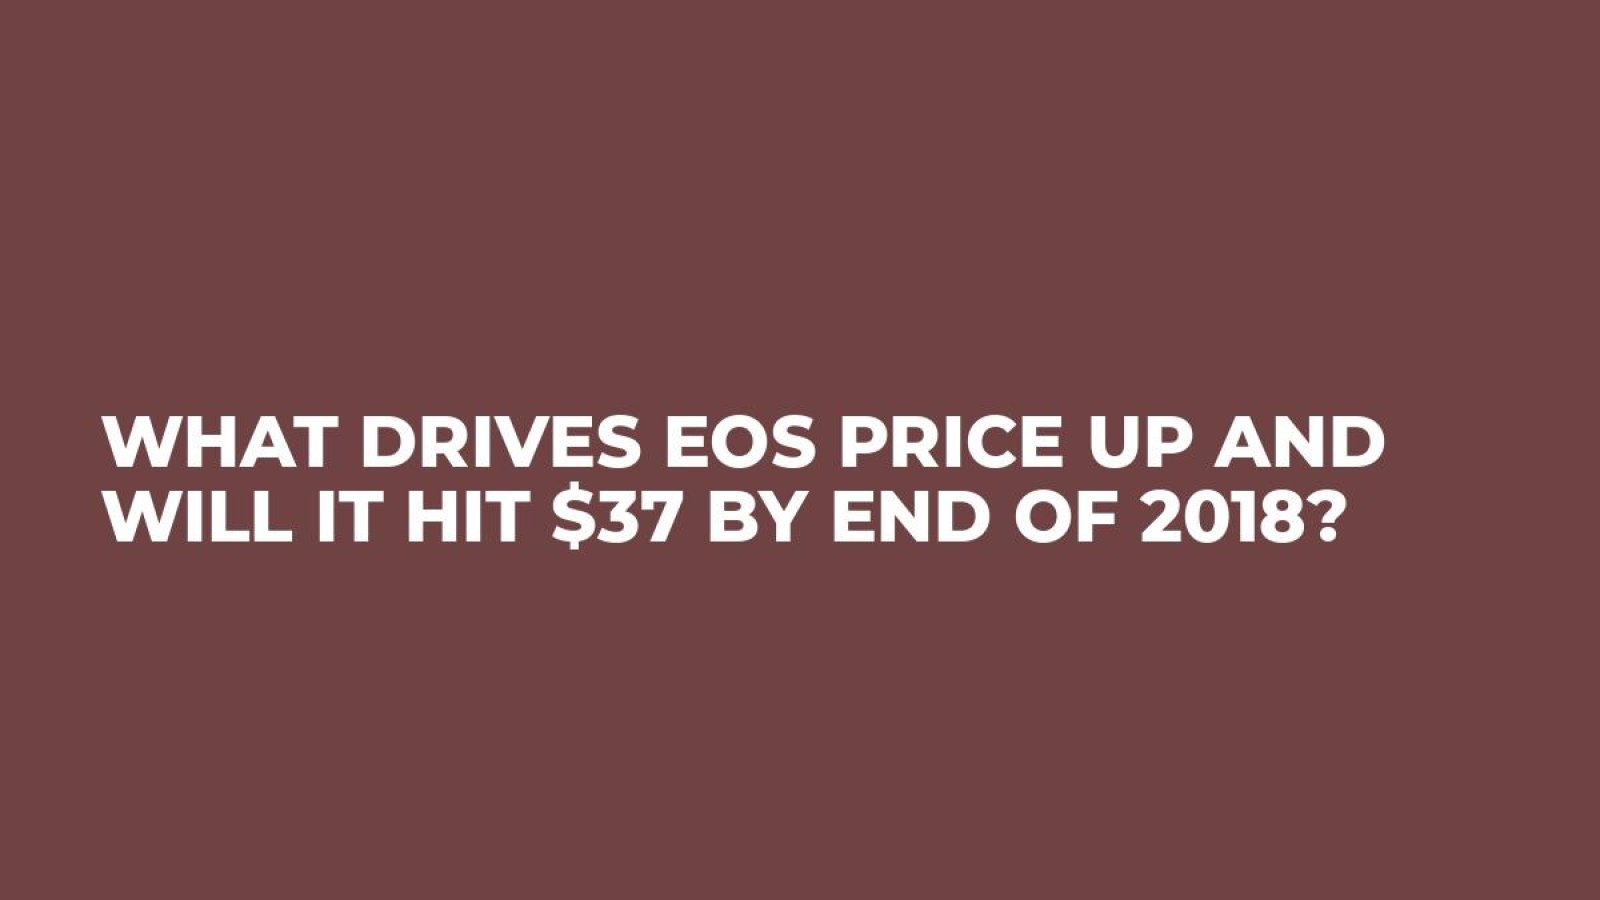 What Drives EOS Price Up and Will it Hit $37 by End of 2018?